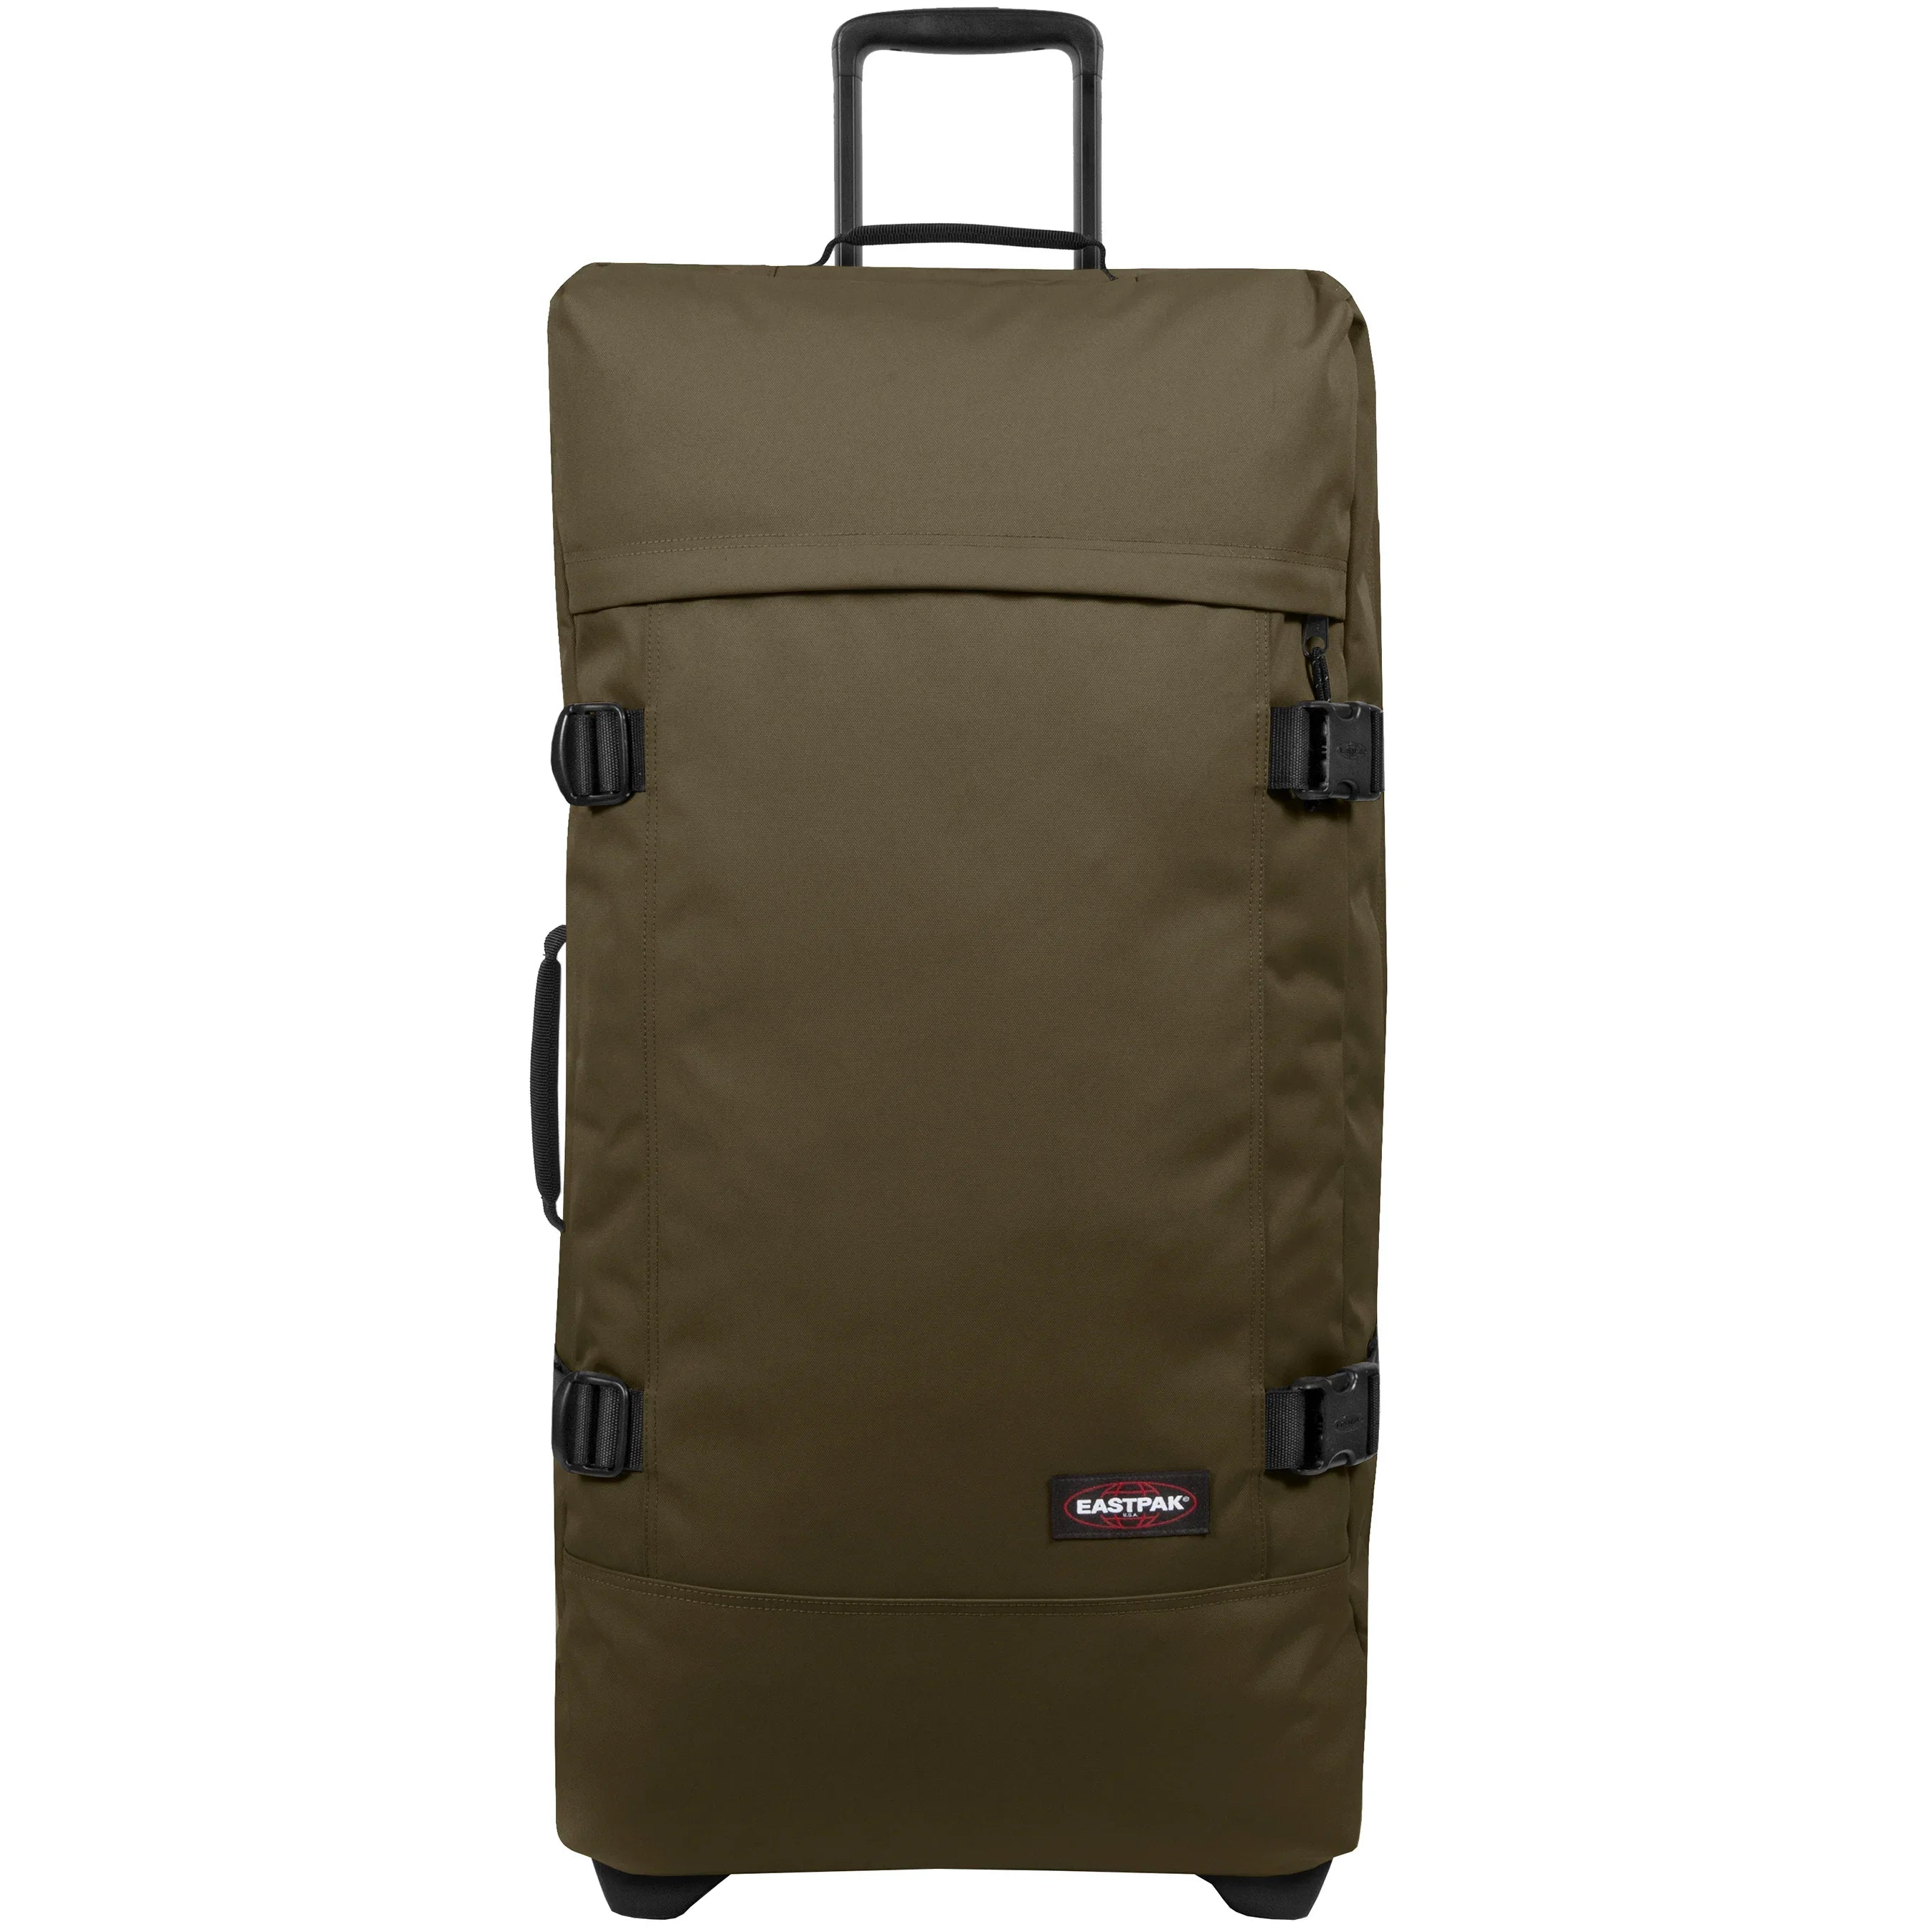 Eastpak Authentic Travel Tranverz 2-Rollen Trolley 79 cm - Army Olive